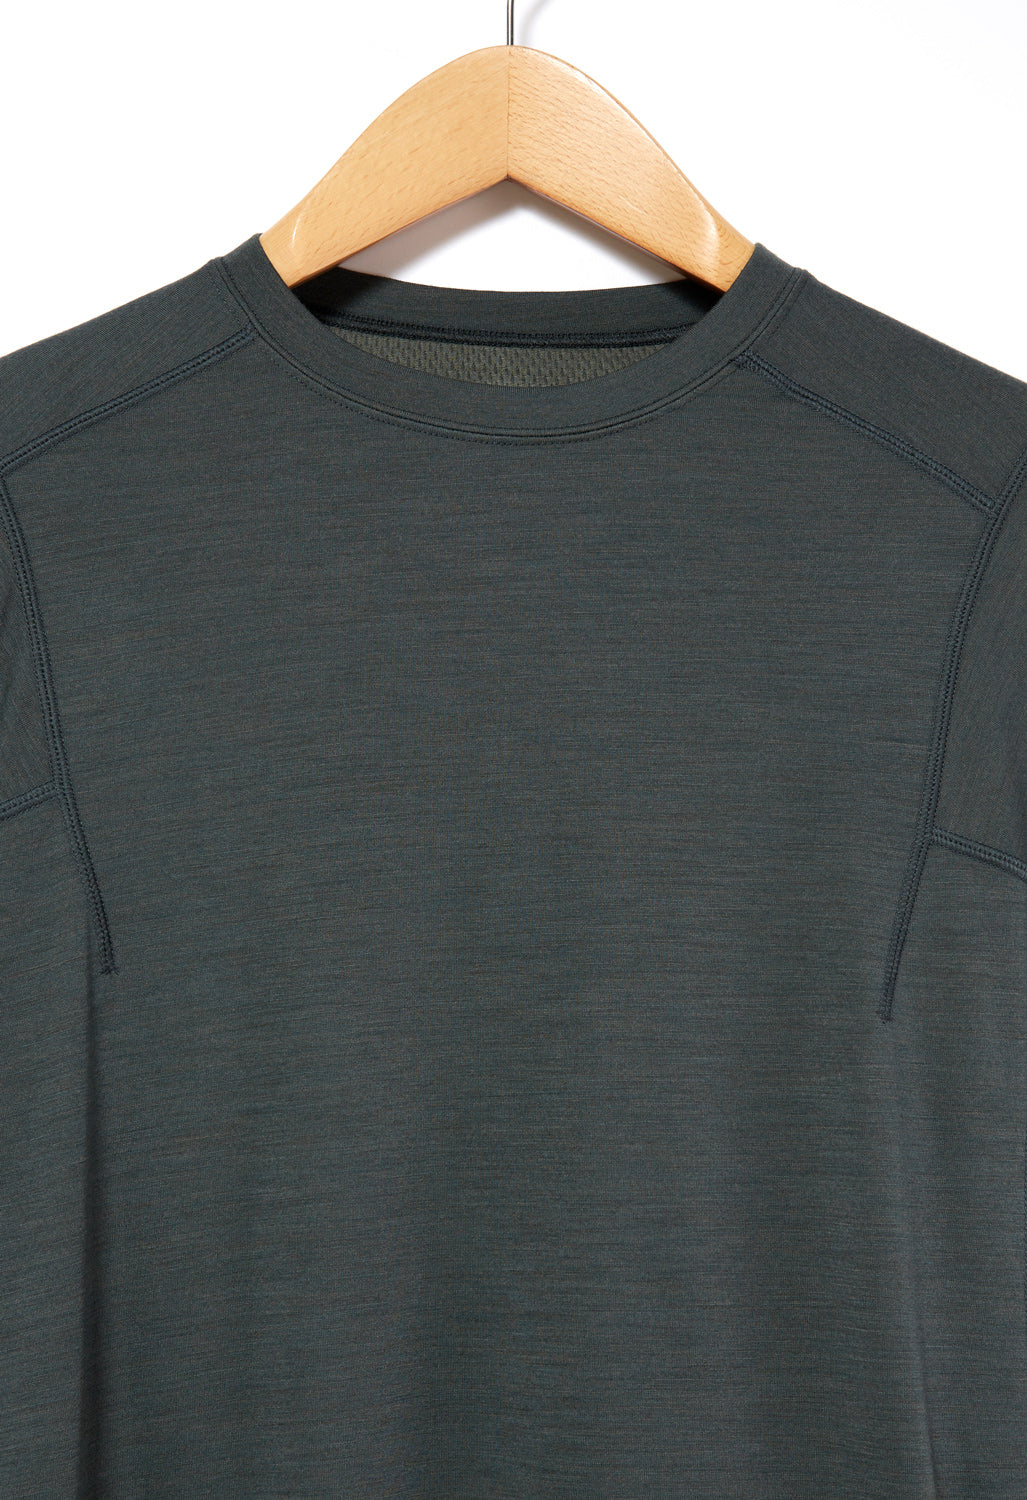 Snow Peak Men's Recycled Pe/Wo Long Sleeved T-Shirt - Forest Green